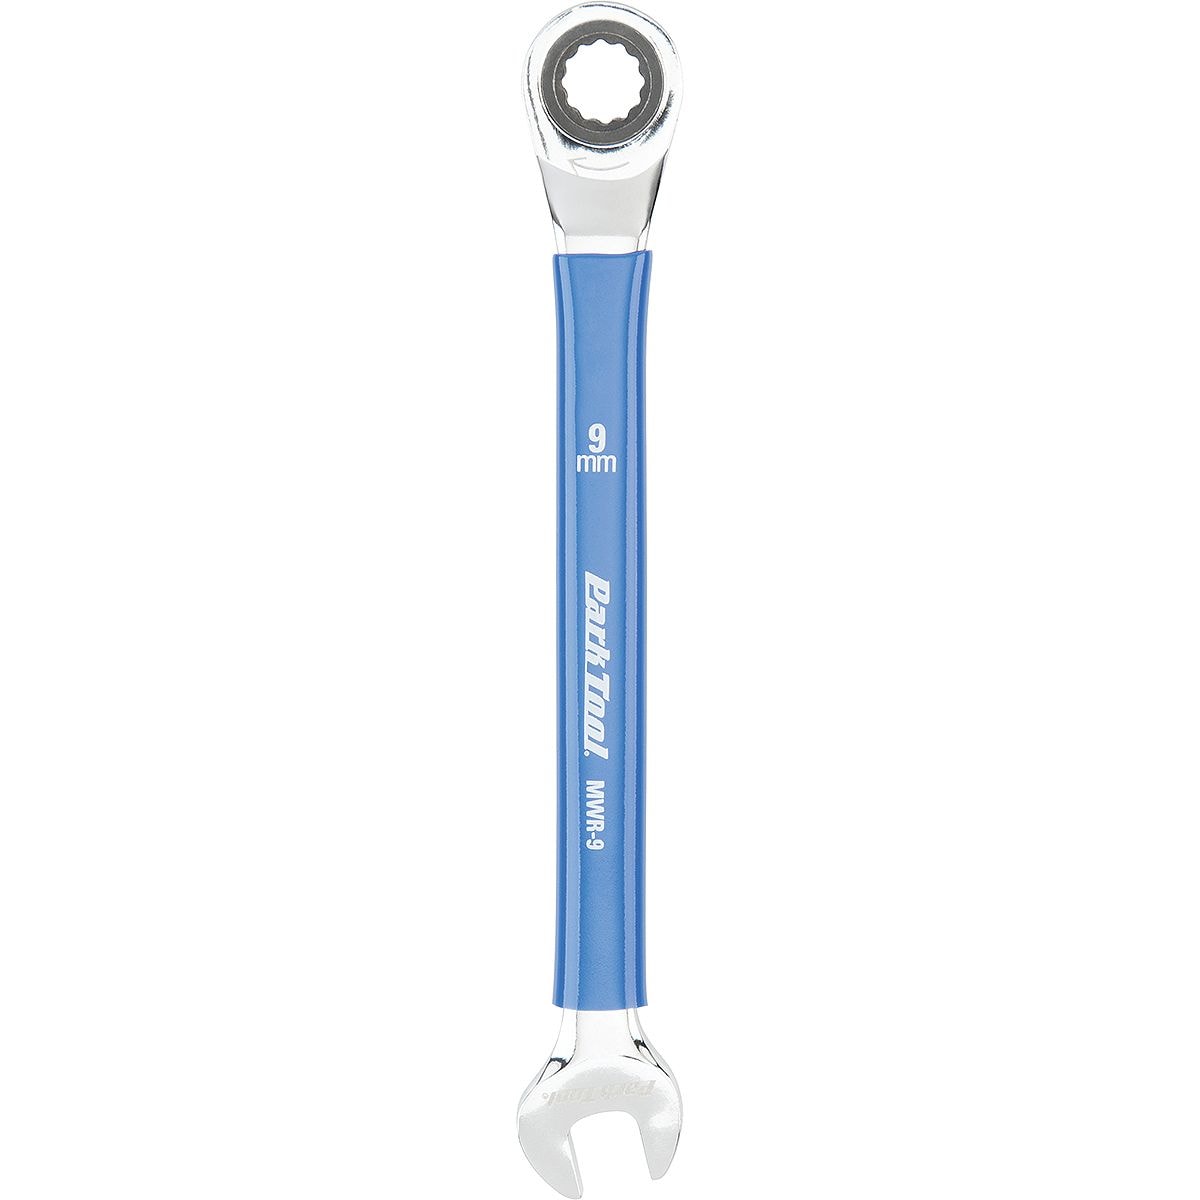 Park Tool Ratcheting Metric Wrench Blue, 9mm